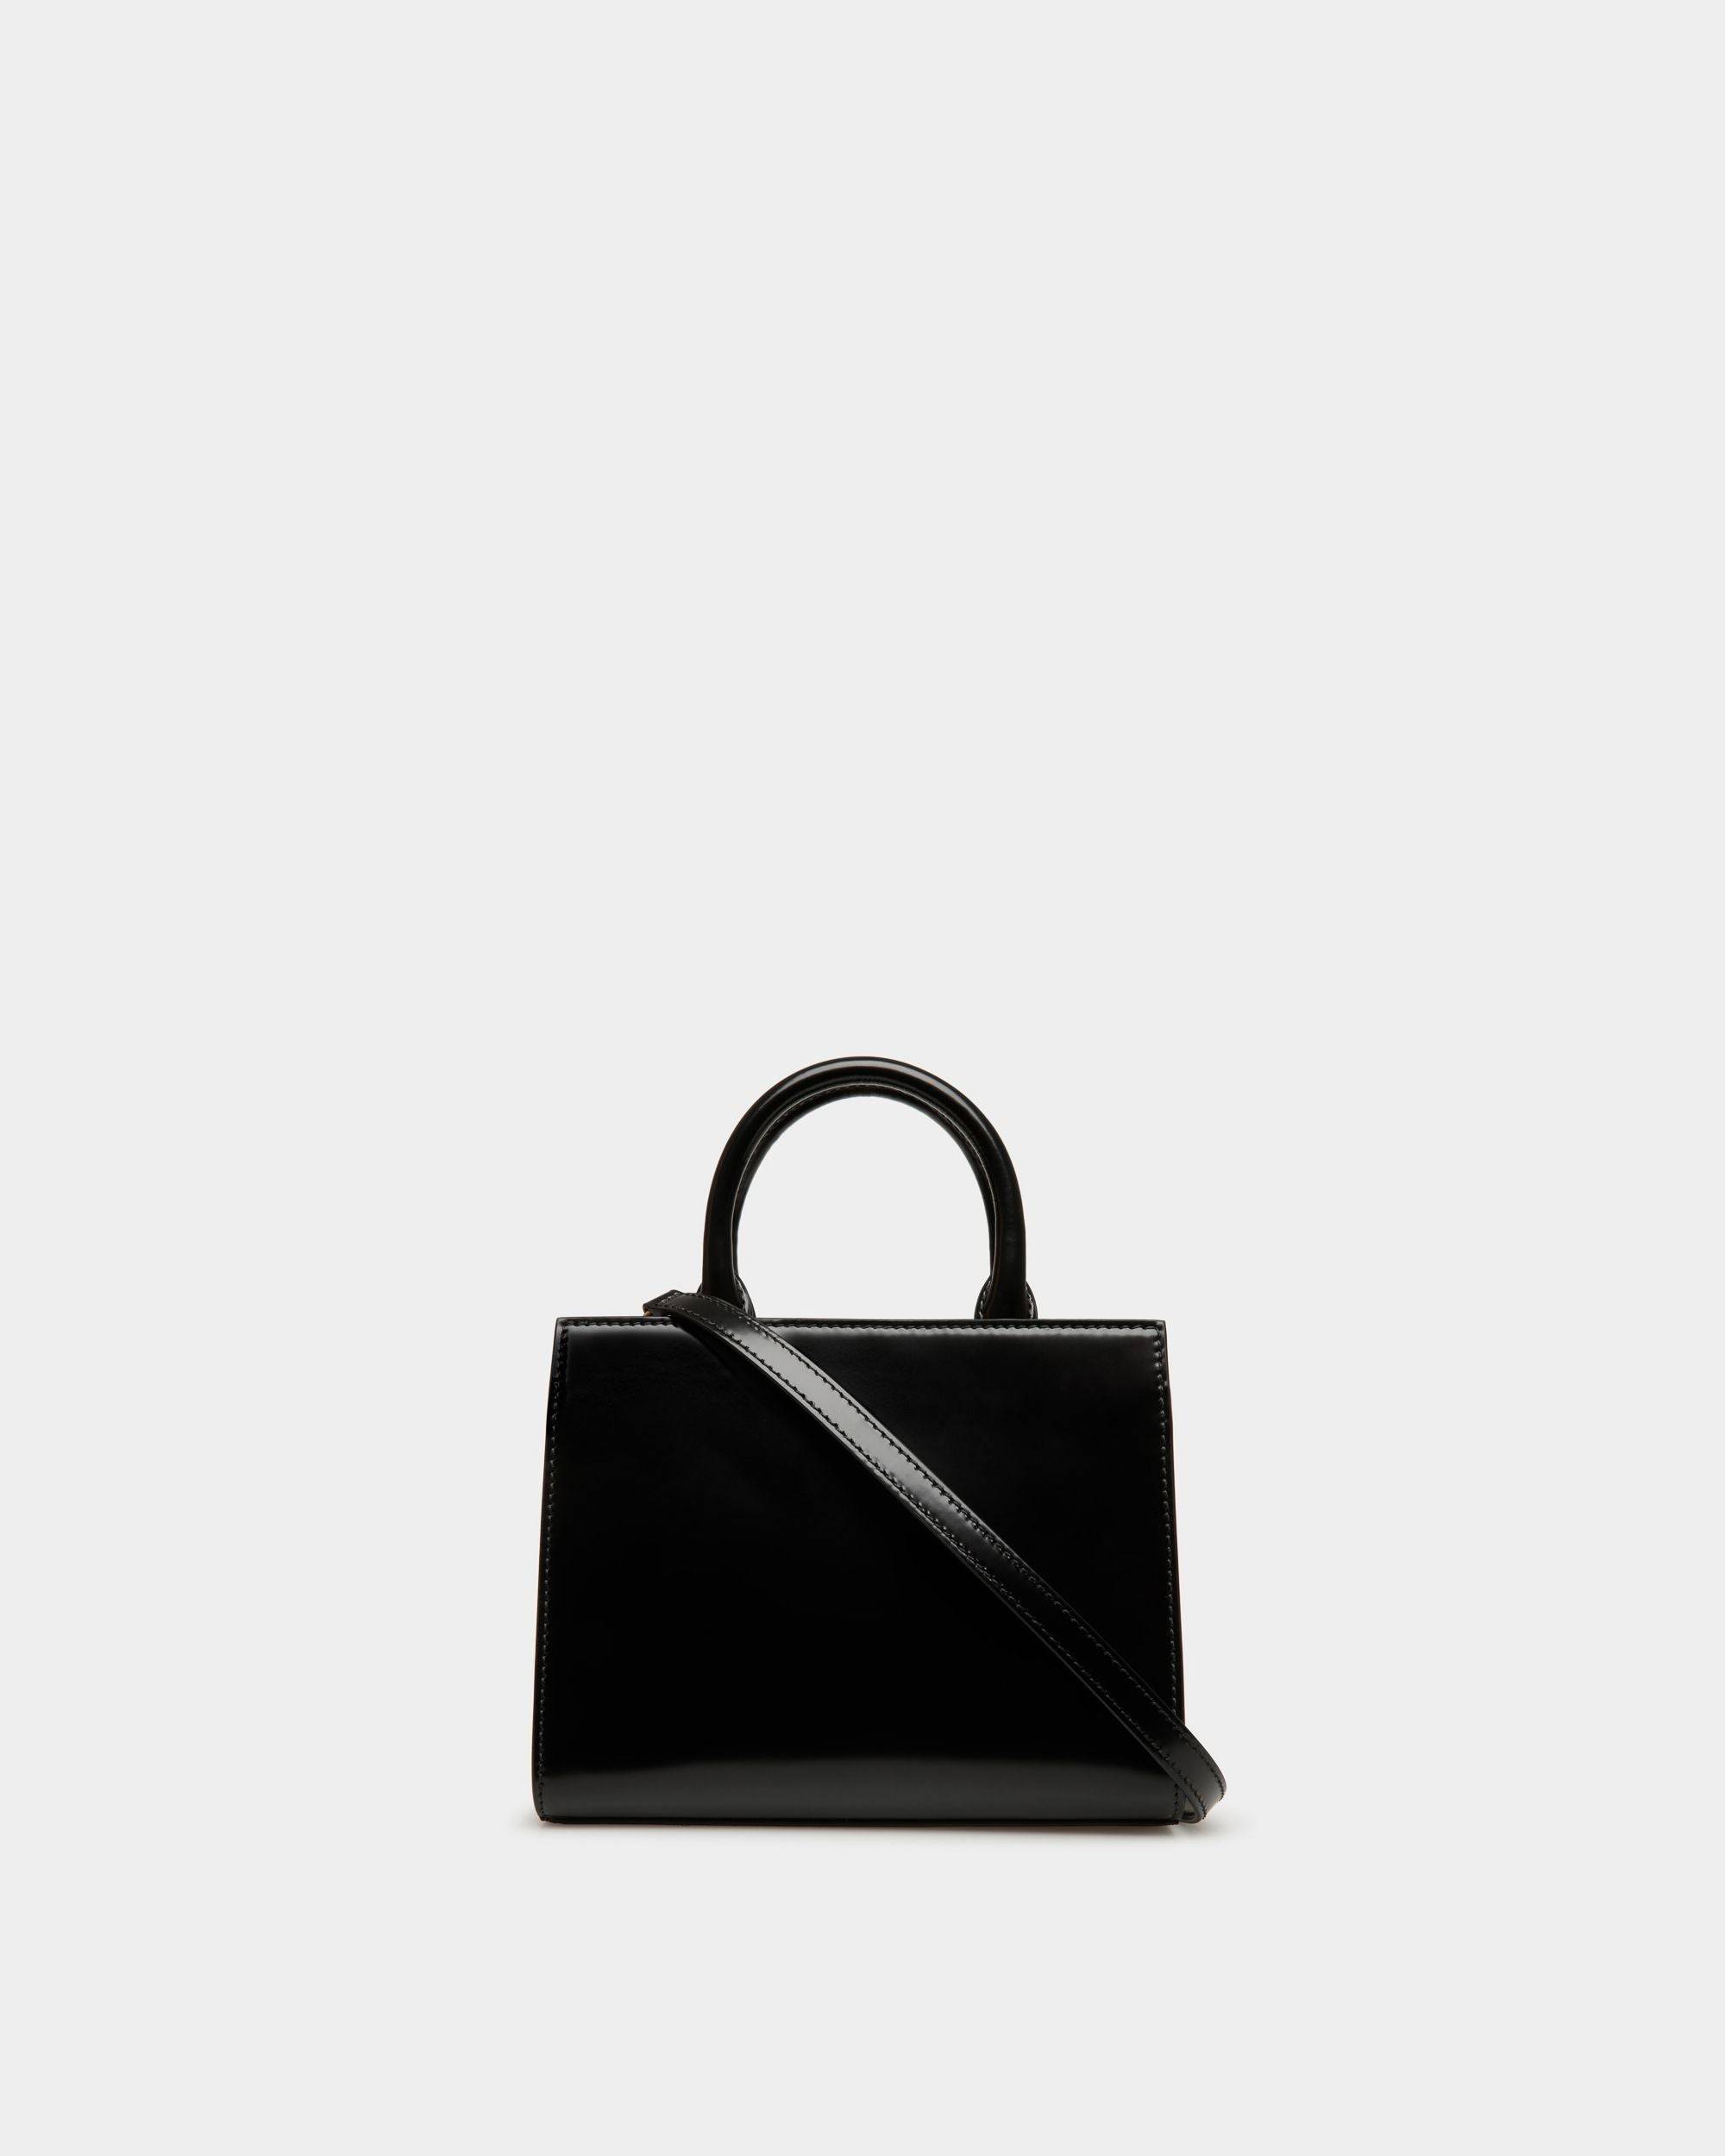 Emblem | Women's Small Tote Bag in Black Brushed Leather | Bally | Still Life Back